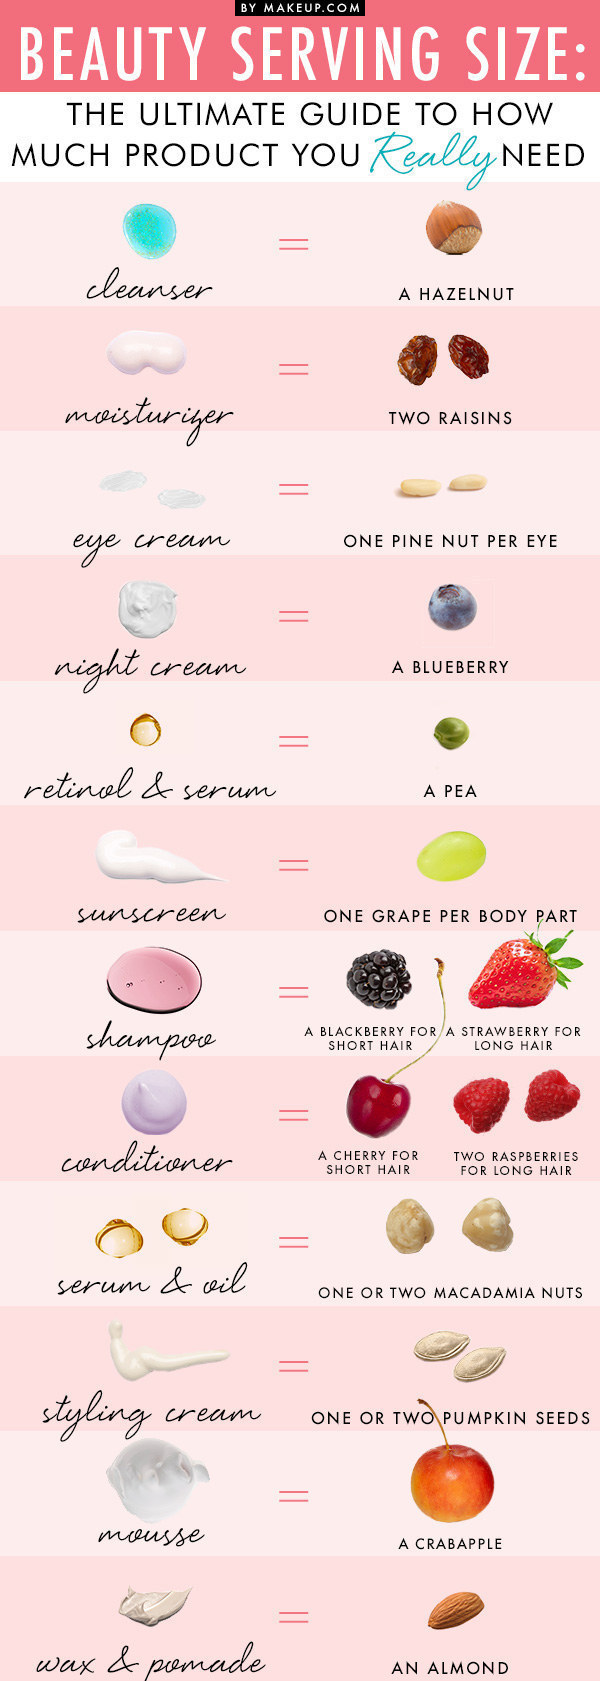 much facial product to use - By Makeup.Com Beauty Serving Size The Ultimate Guide To How Much Product You Really Need cleanser A Hazelnut moisturizer Two Raisins eye cream One Pine Nut Per Eye night cream A Blueberry retinal & serum A Pea sunscreen One Gr